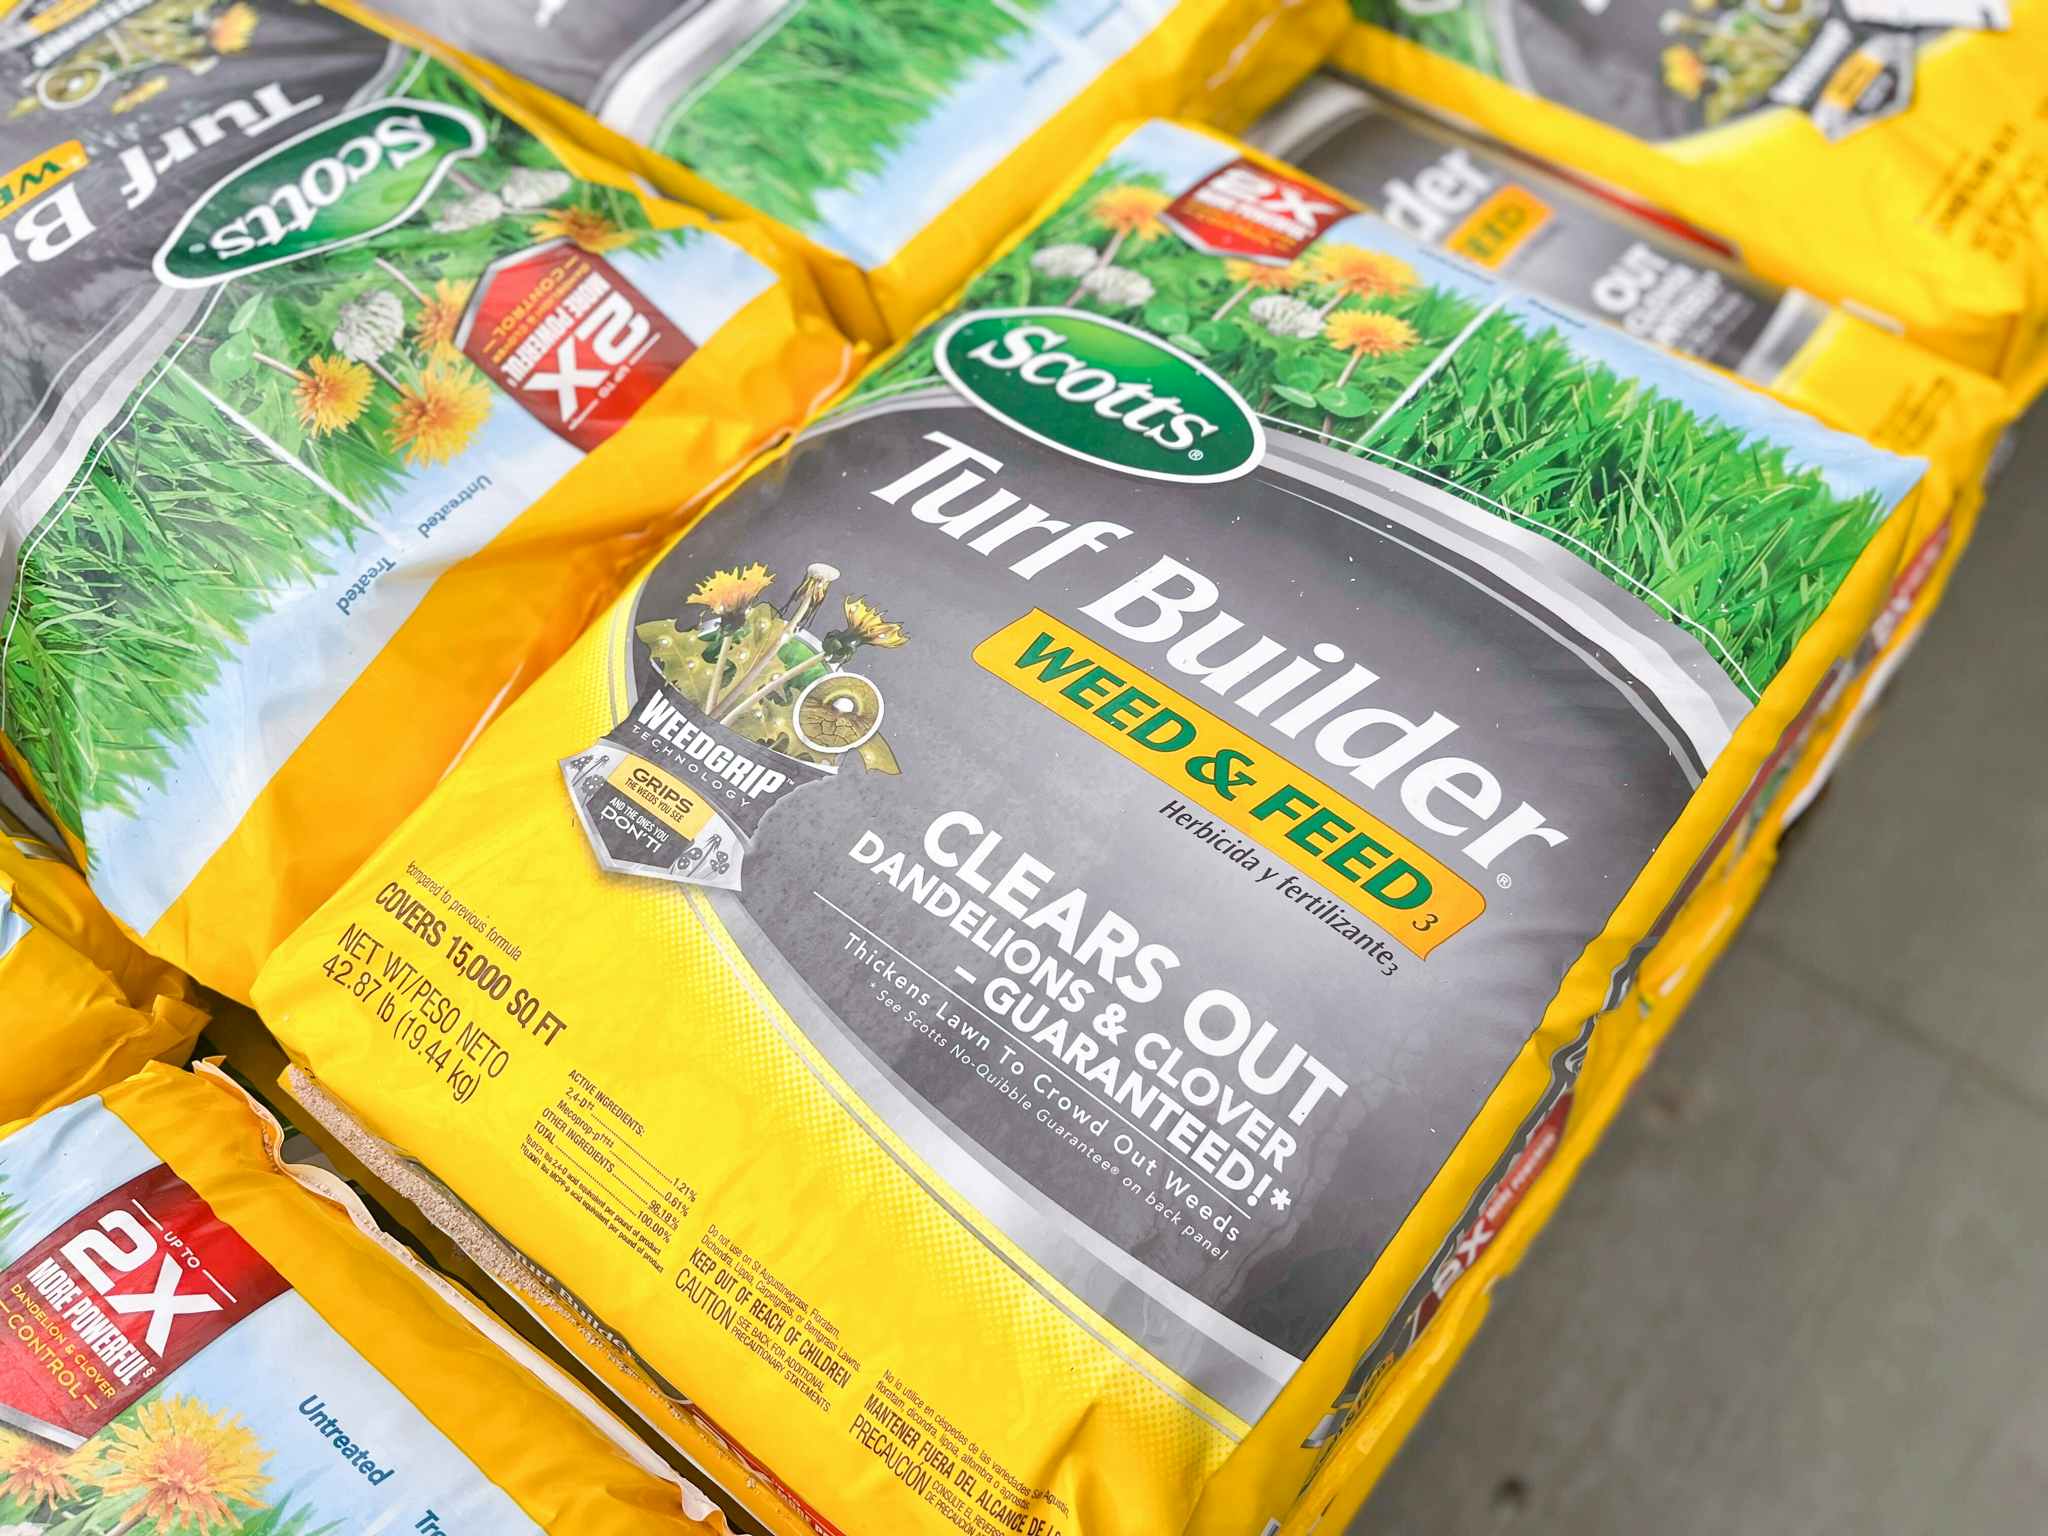 Scotts Turf Builder Weed & Feed at Lowe's